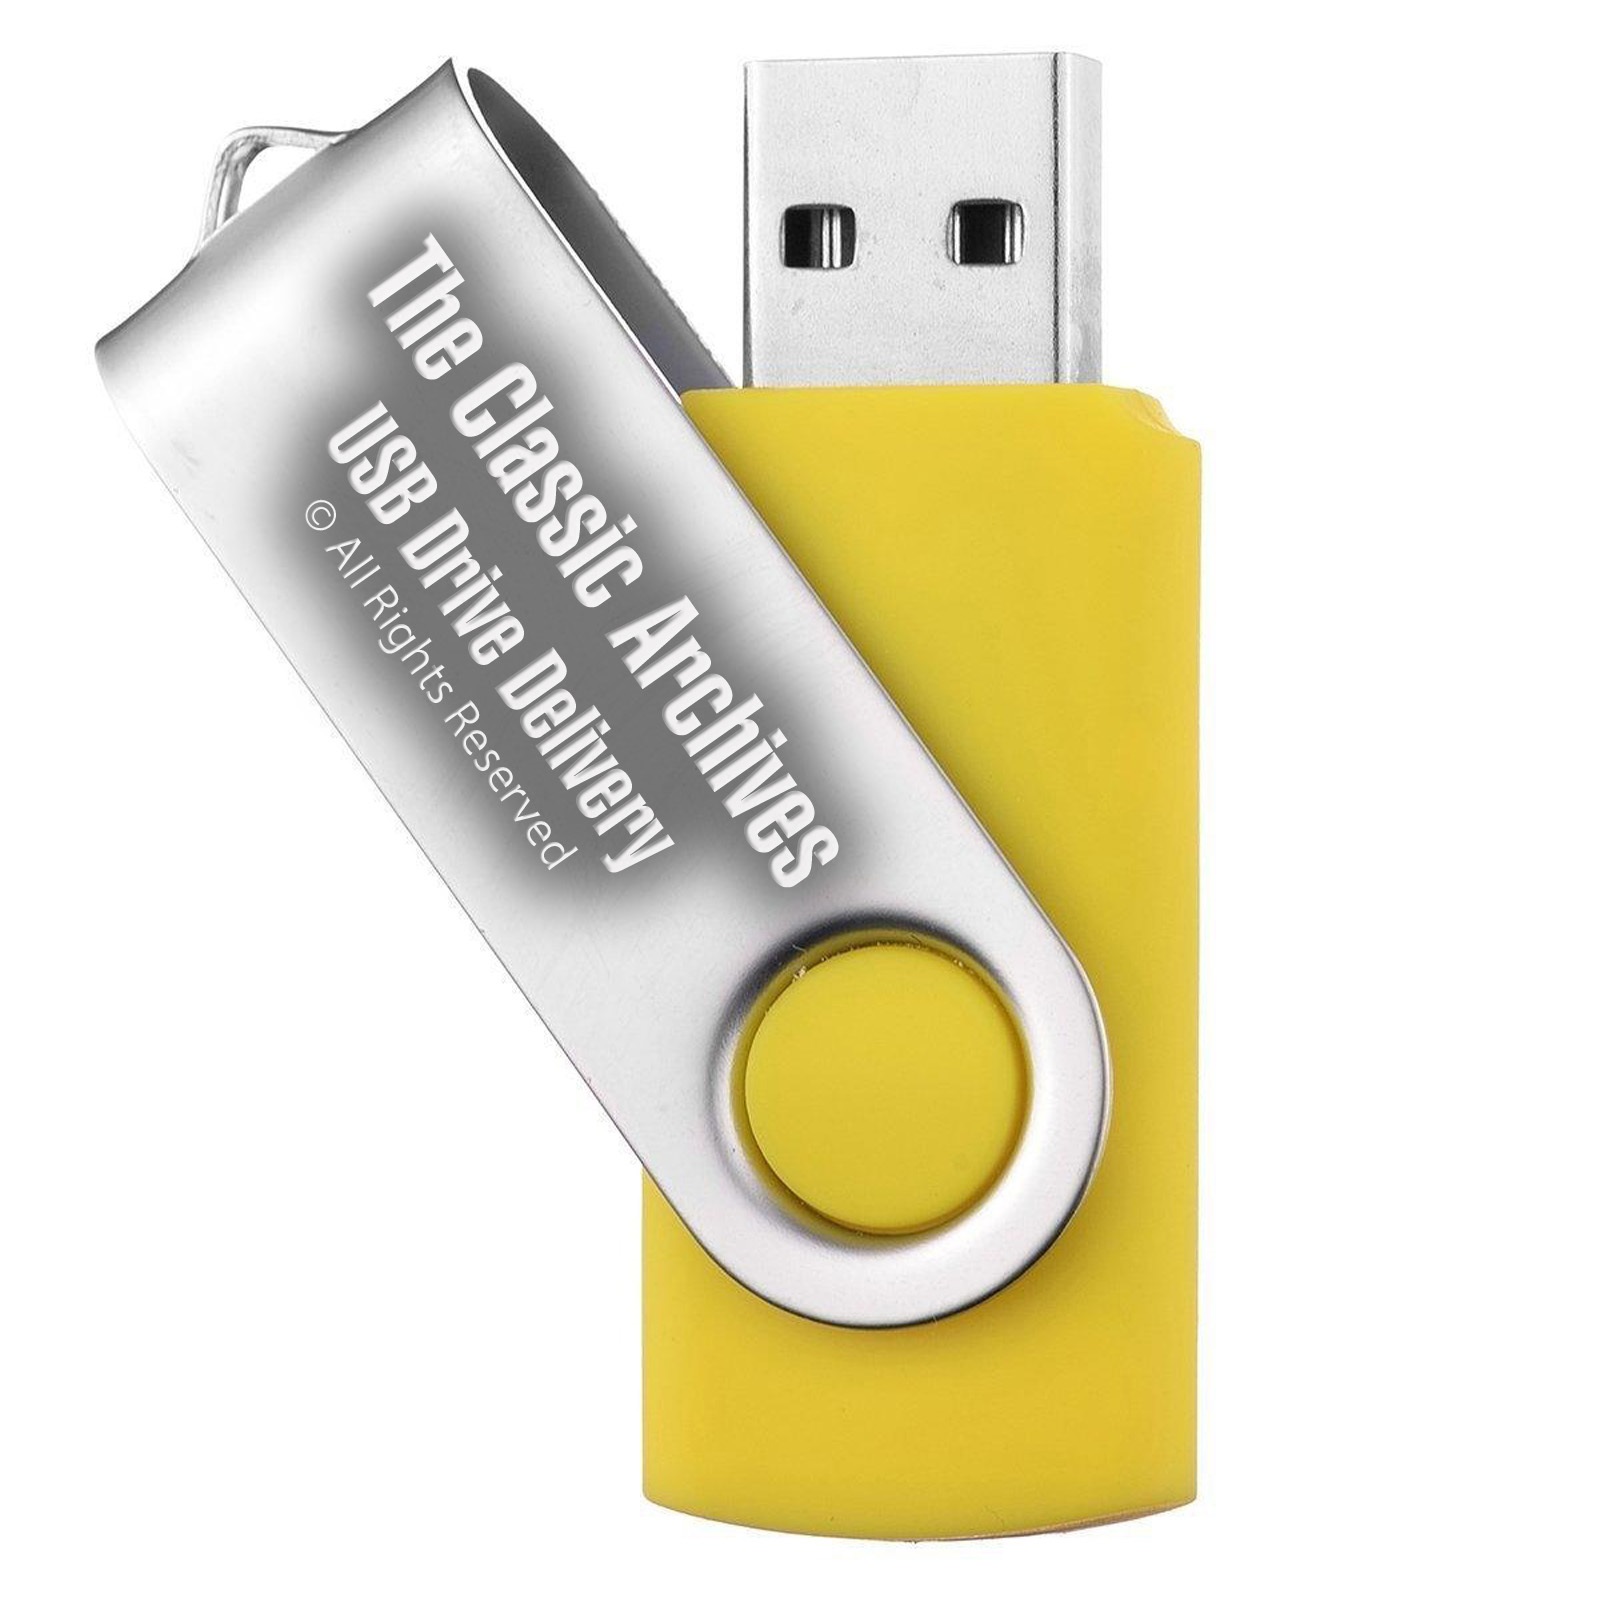 Get all your disks delivered on a 32GB USB Flash Drive!